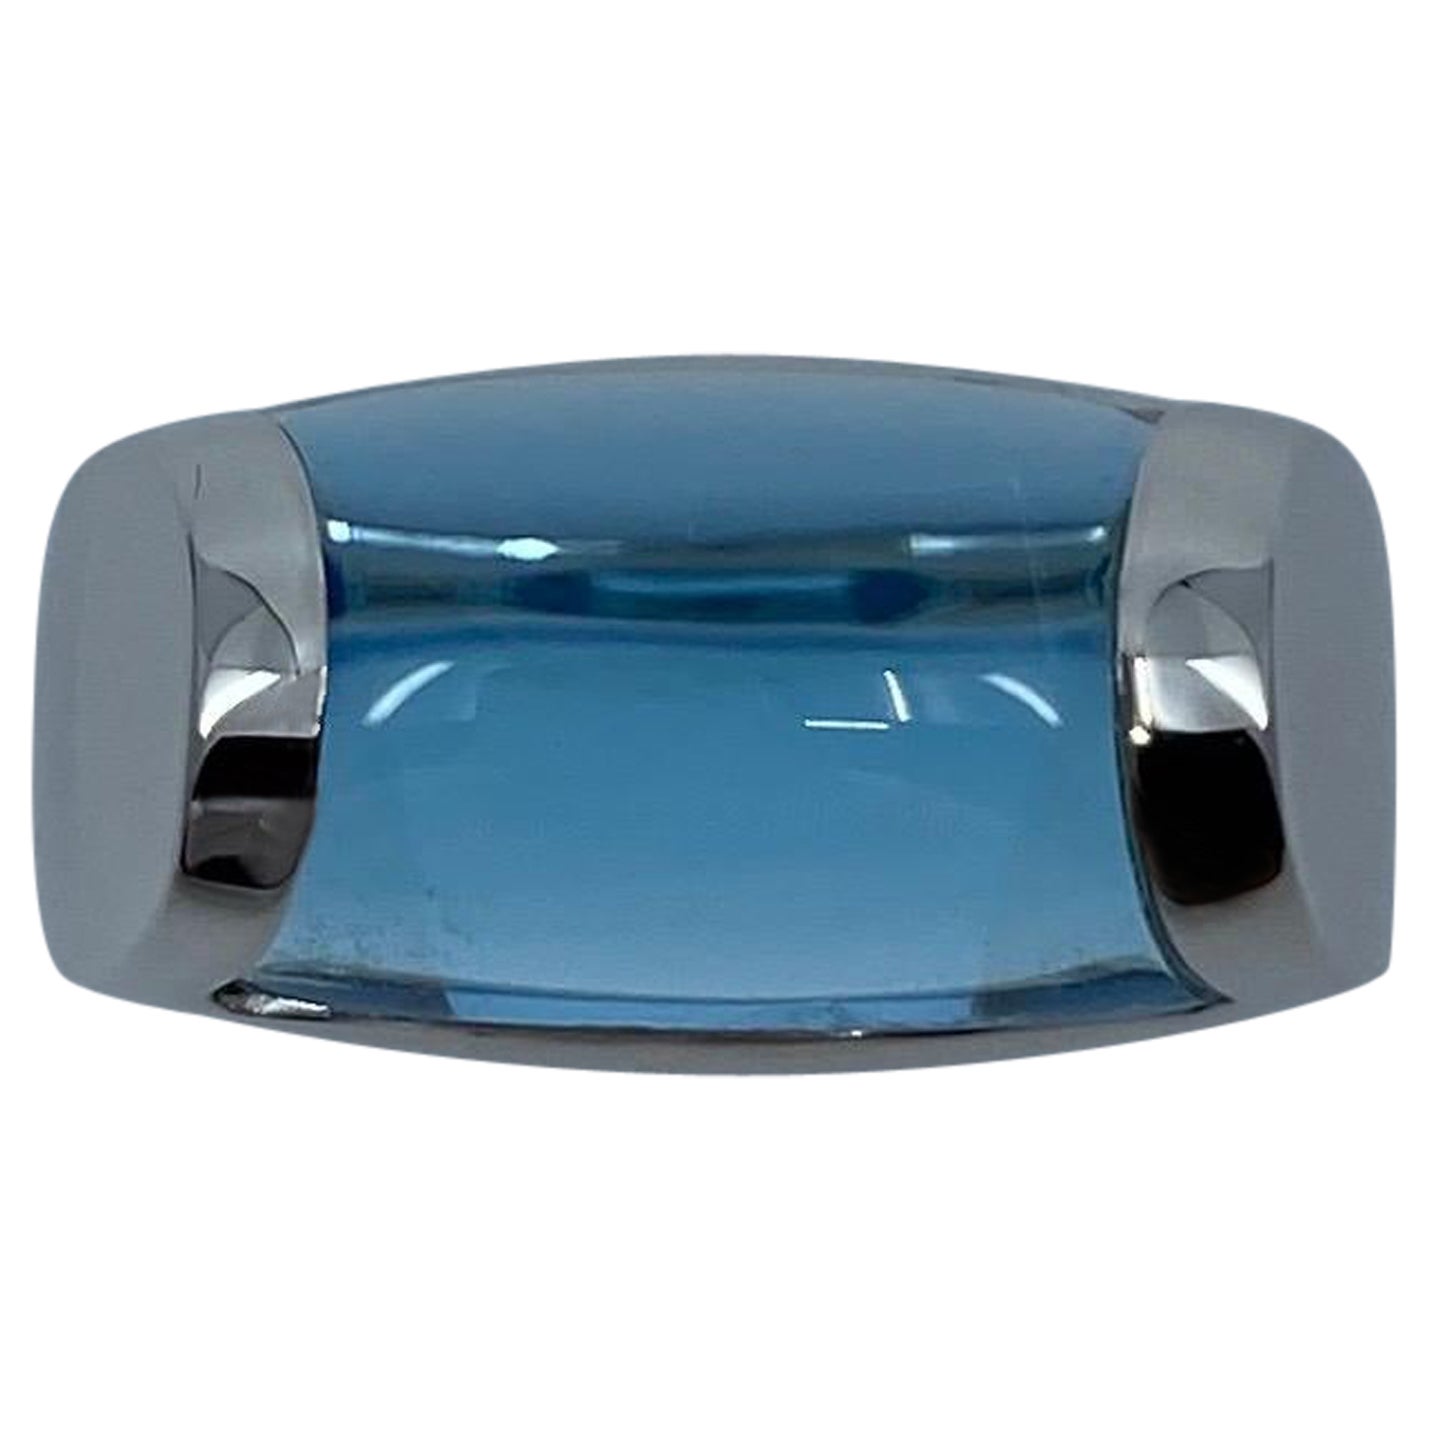 Bvlgari Blue Topaz Tronchetto 18k White Gold Ring.

Beautiful domed blue topaz set in a fine 18k white gold tension set ring.

In excellent condition, has been professionally polished and cleaned.

Ring size UK: L1/2
US 6. 

Comes with original